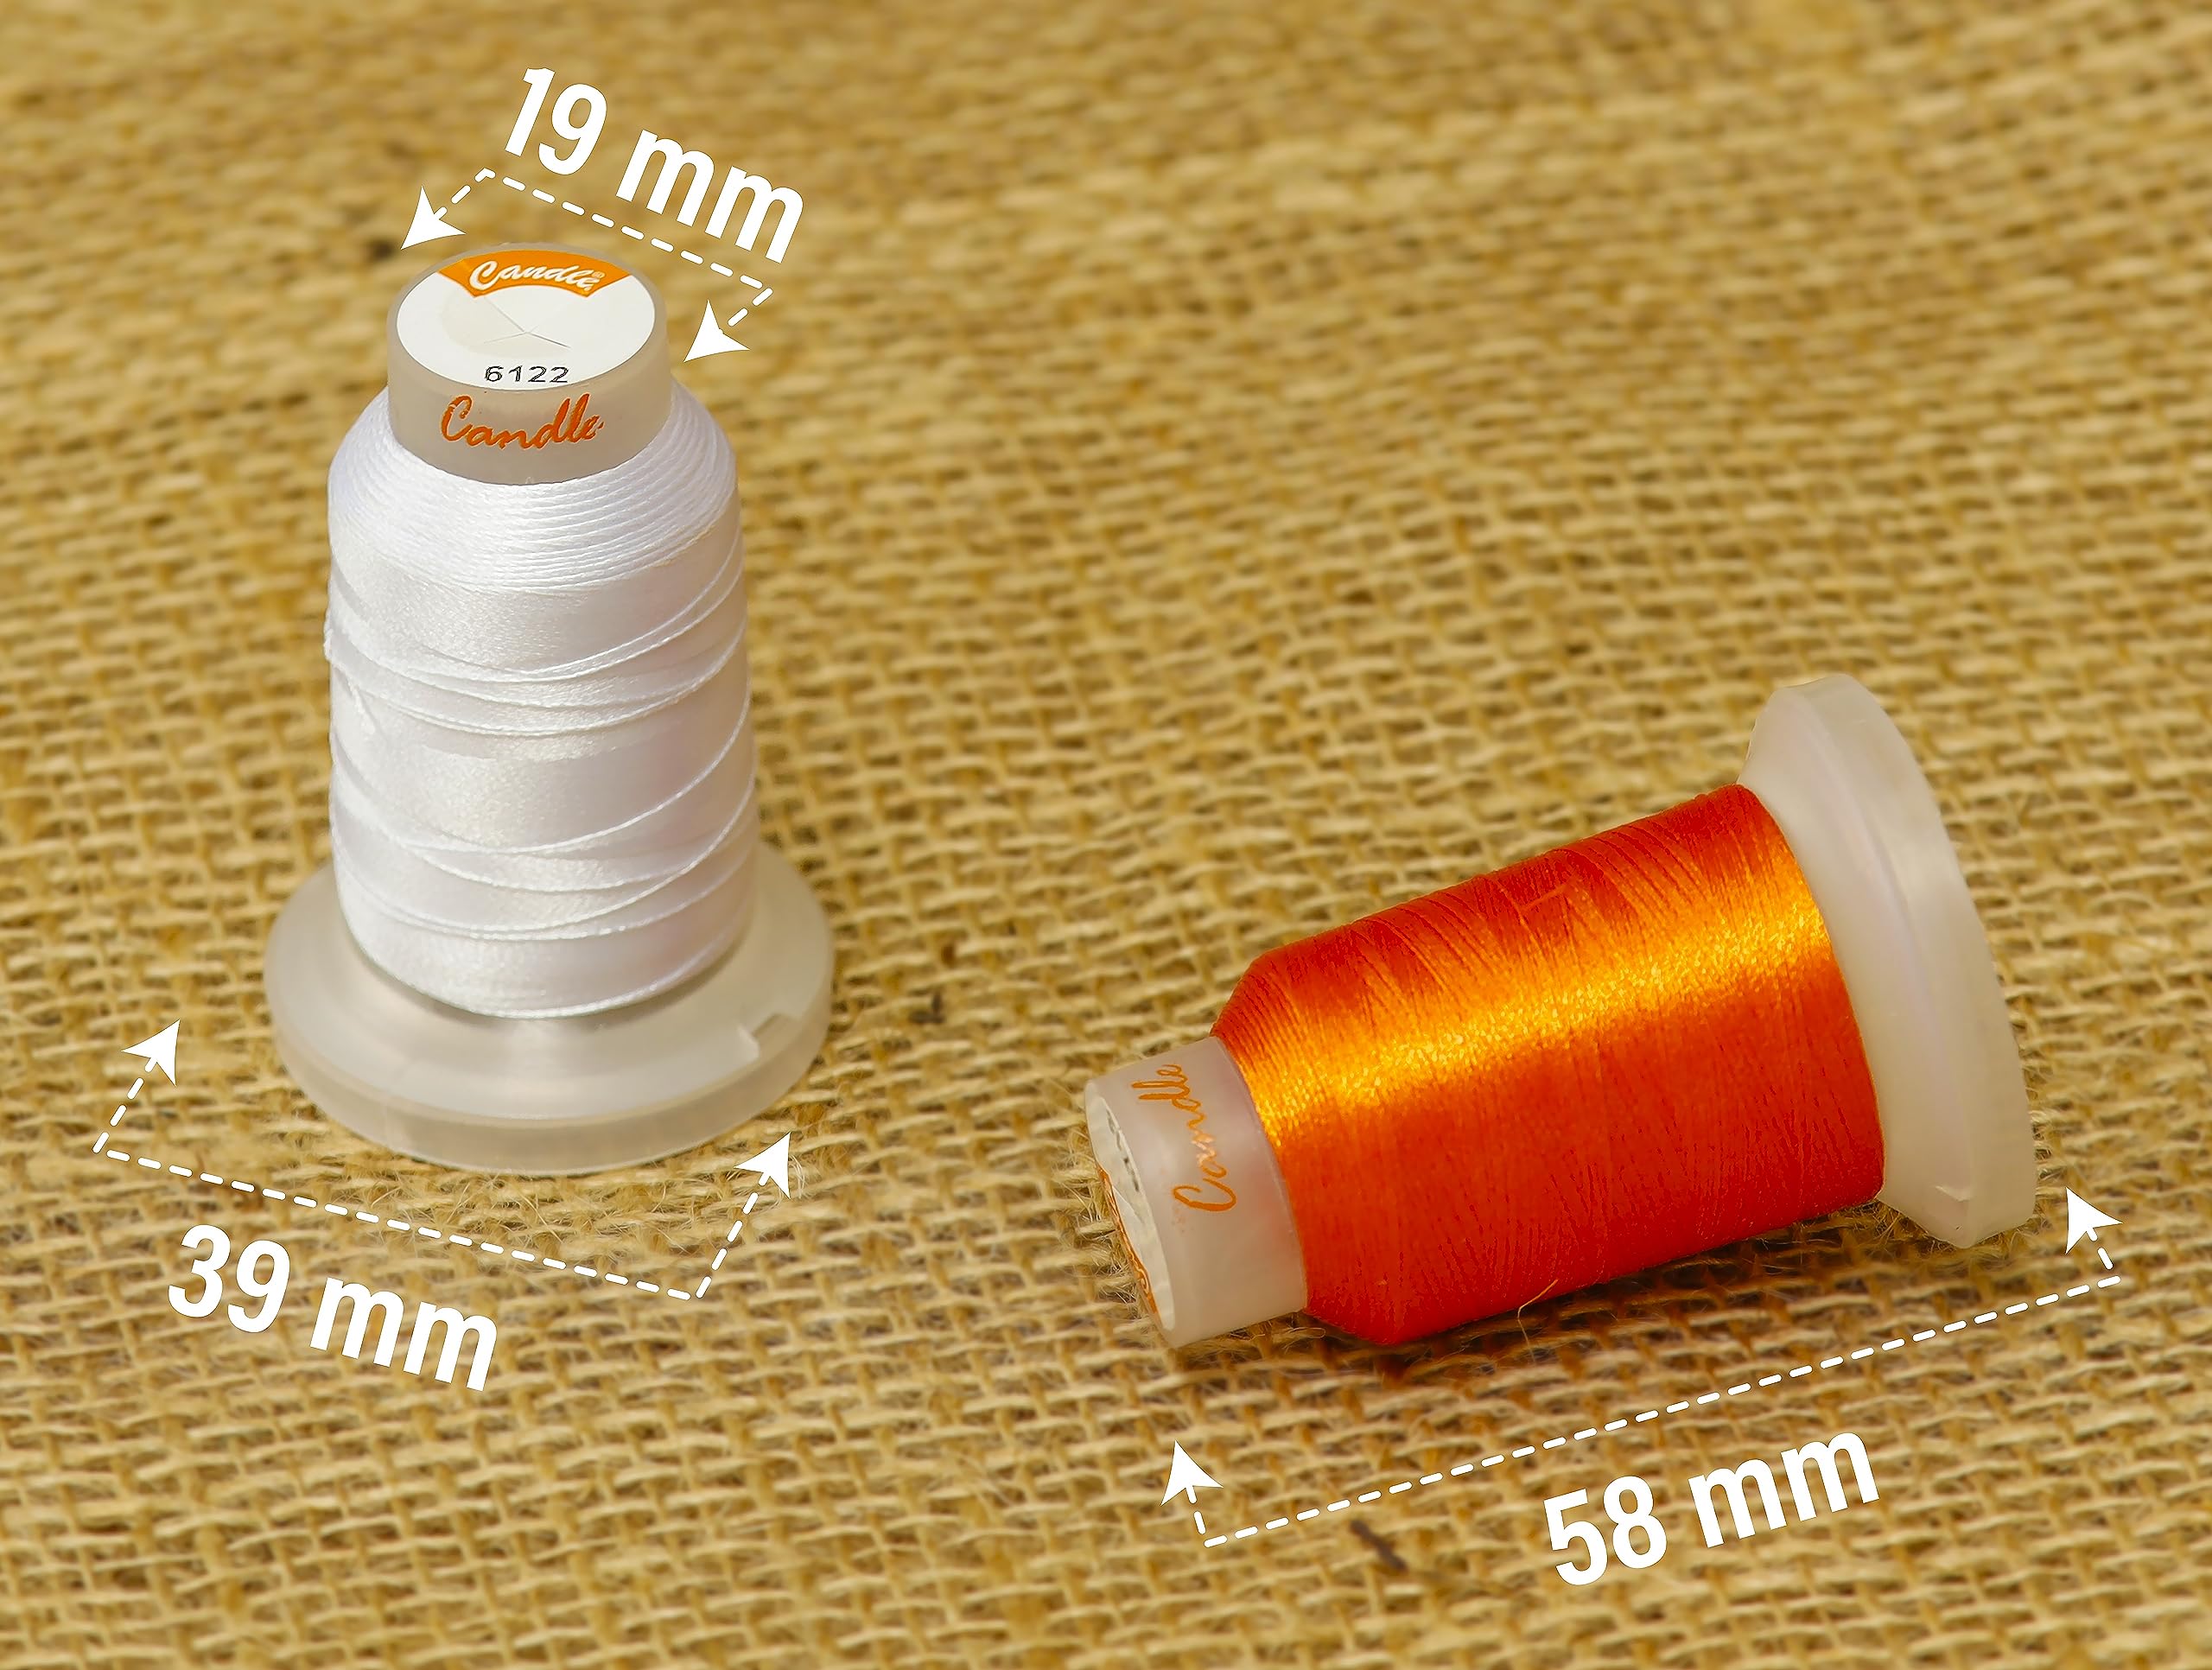 Candle 63 Colors Embroidery Machine Thread - Kit of Polyester Thread Spools 500M (550 Yards) for Home Users